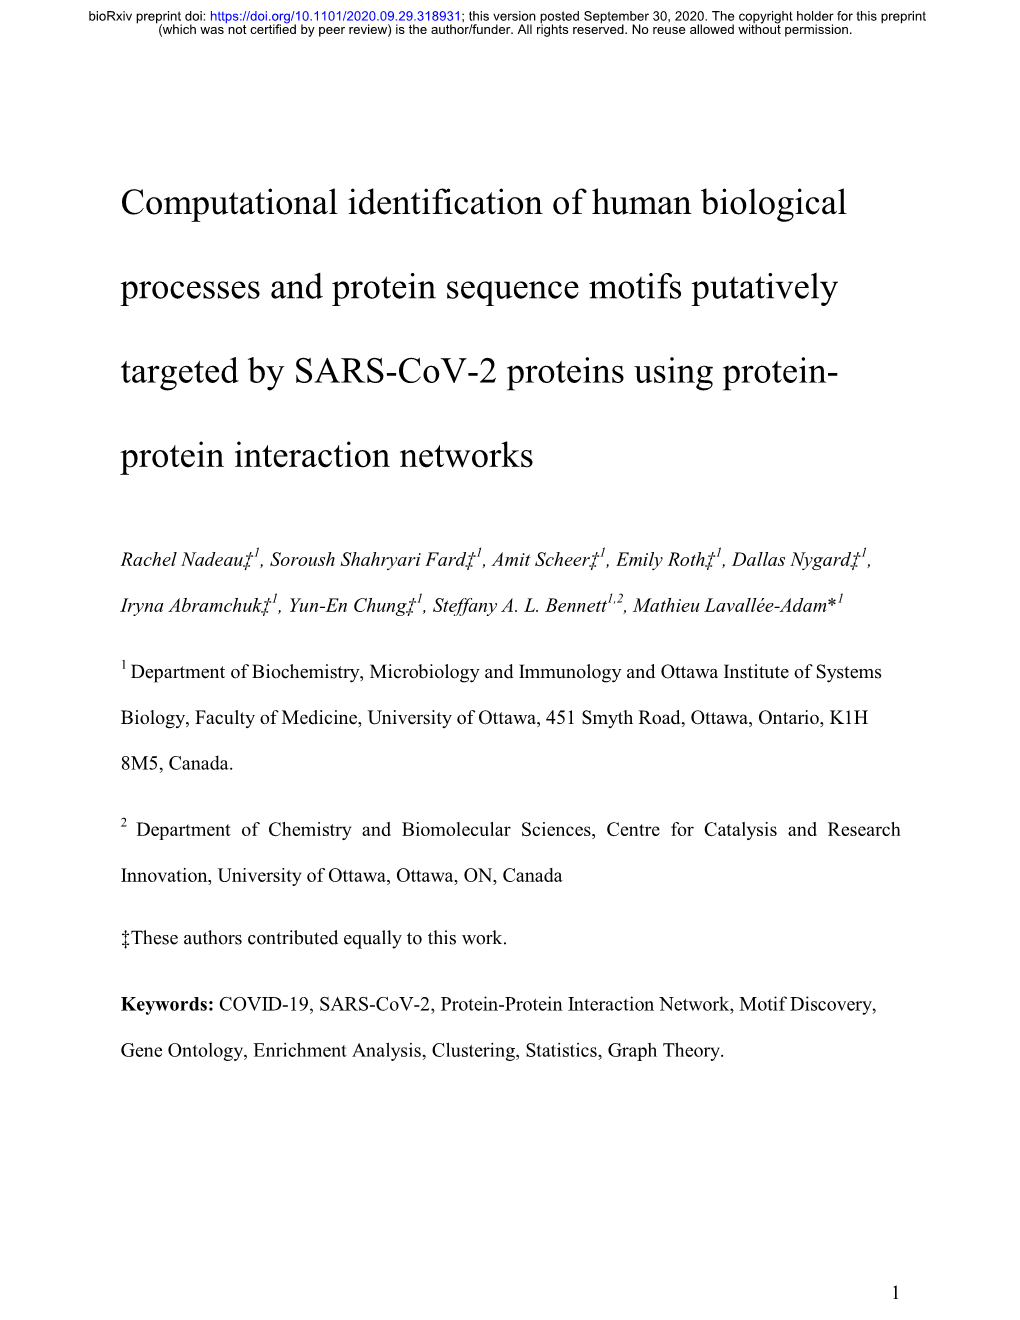 Computational Identification of Human Biological Processes and Protein